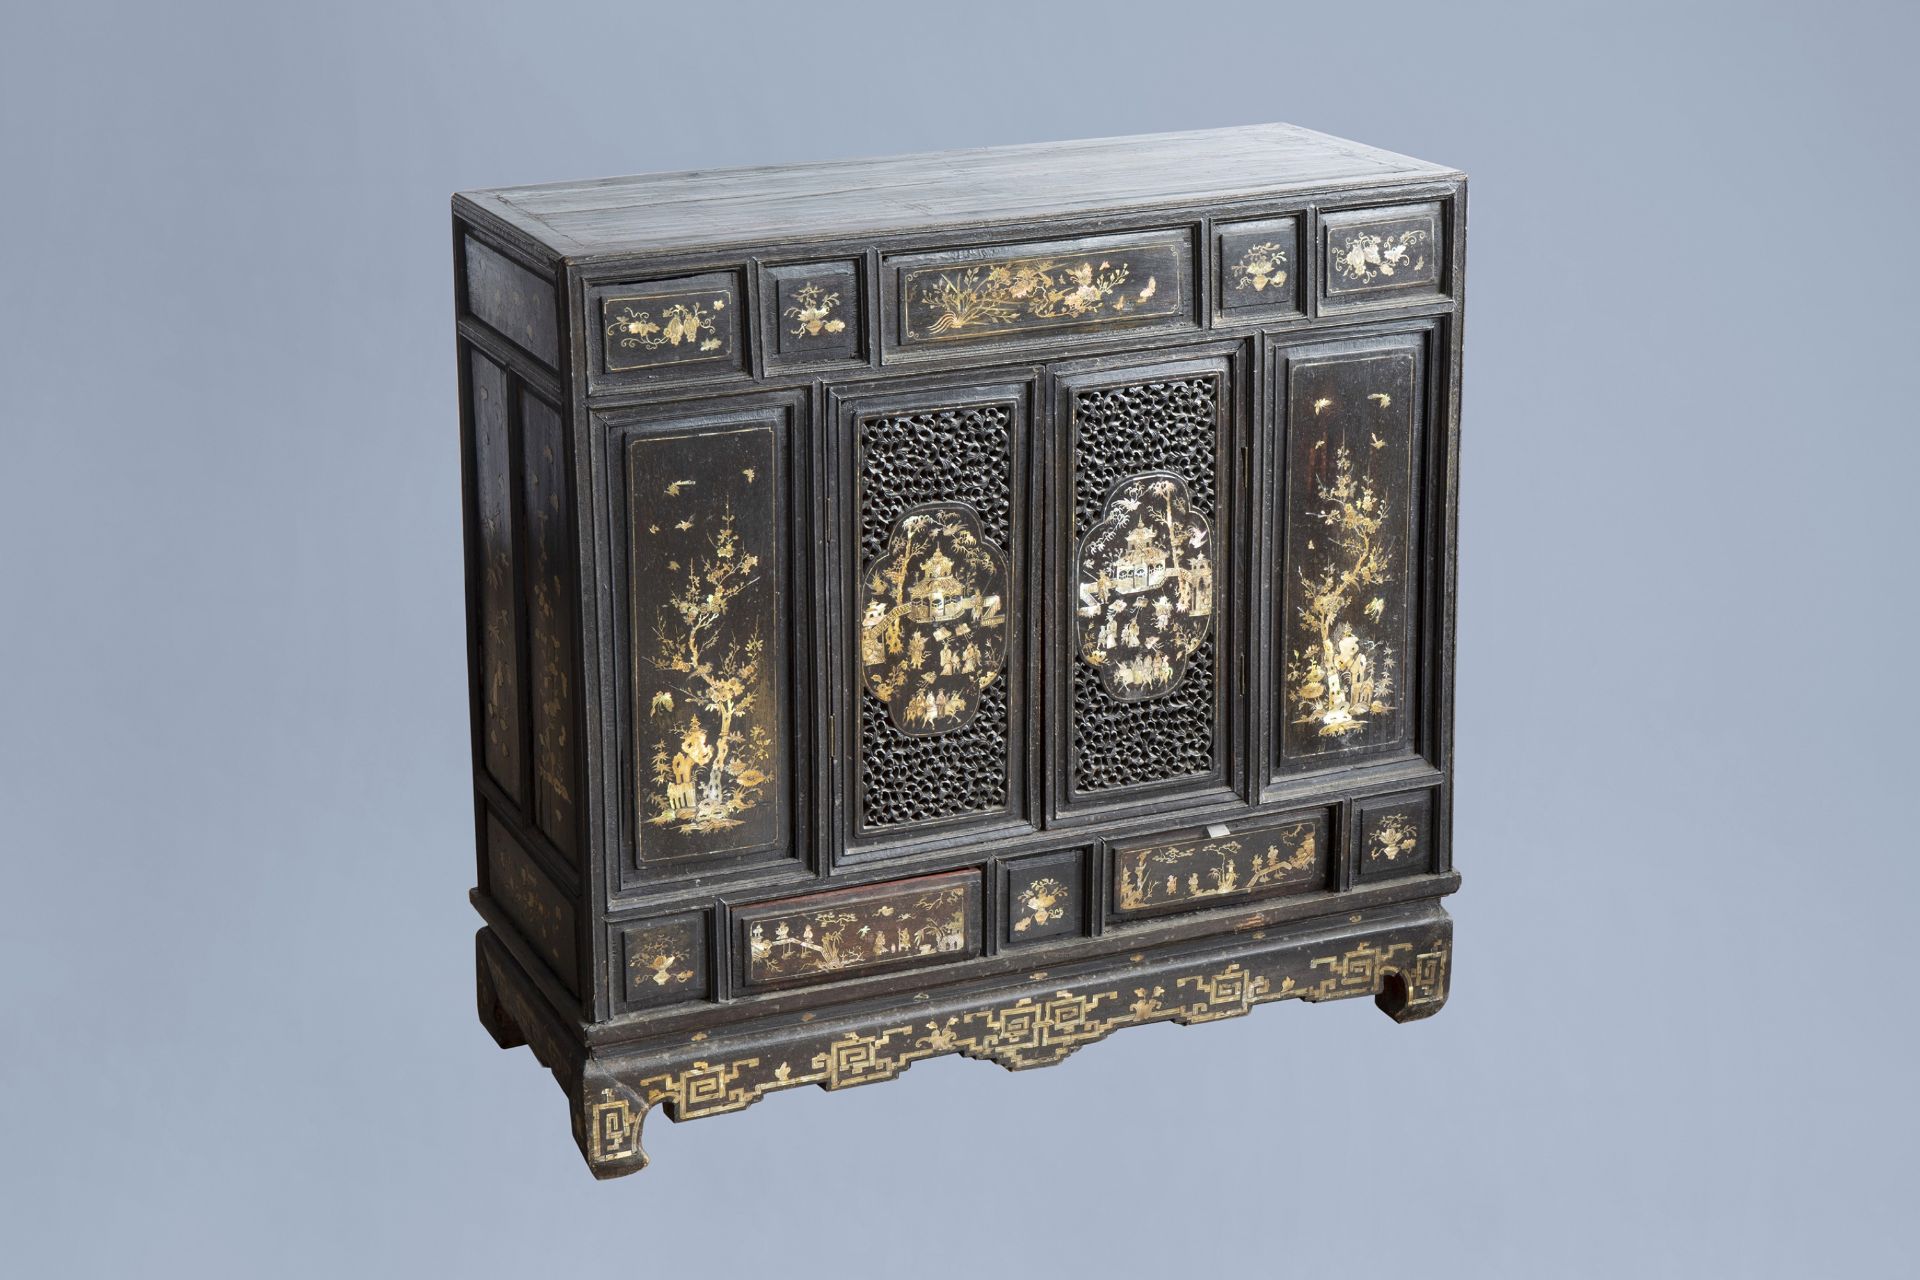 A Vietnamese mother-of-pearl inlaid wood two-door cabinet with figures in a palace garden and floral